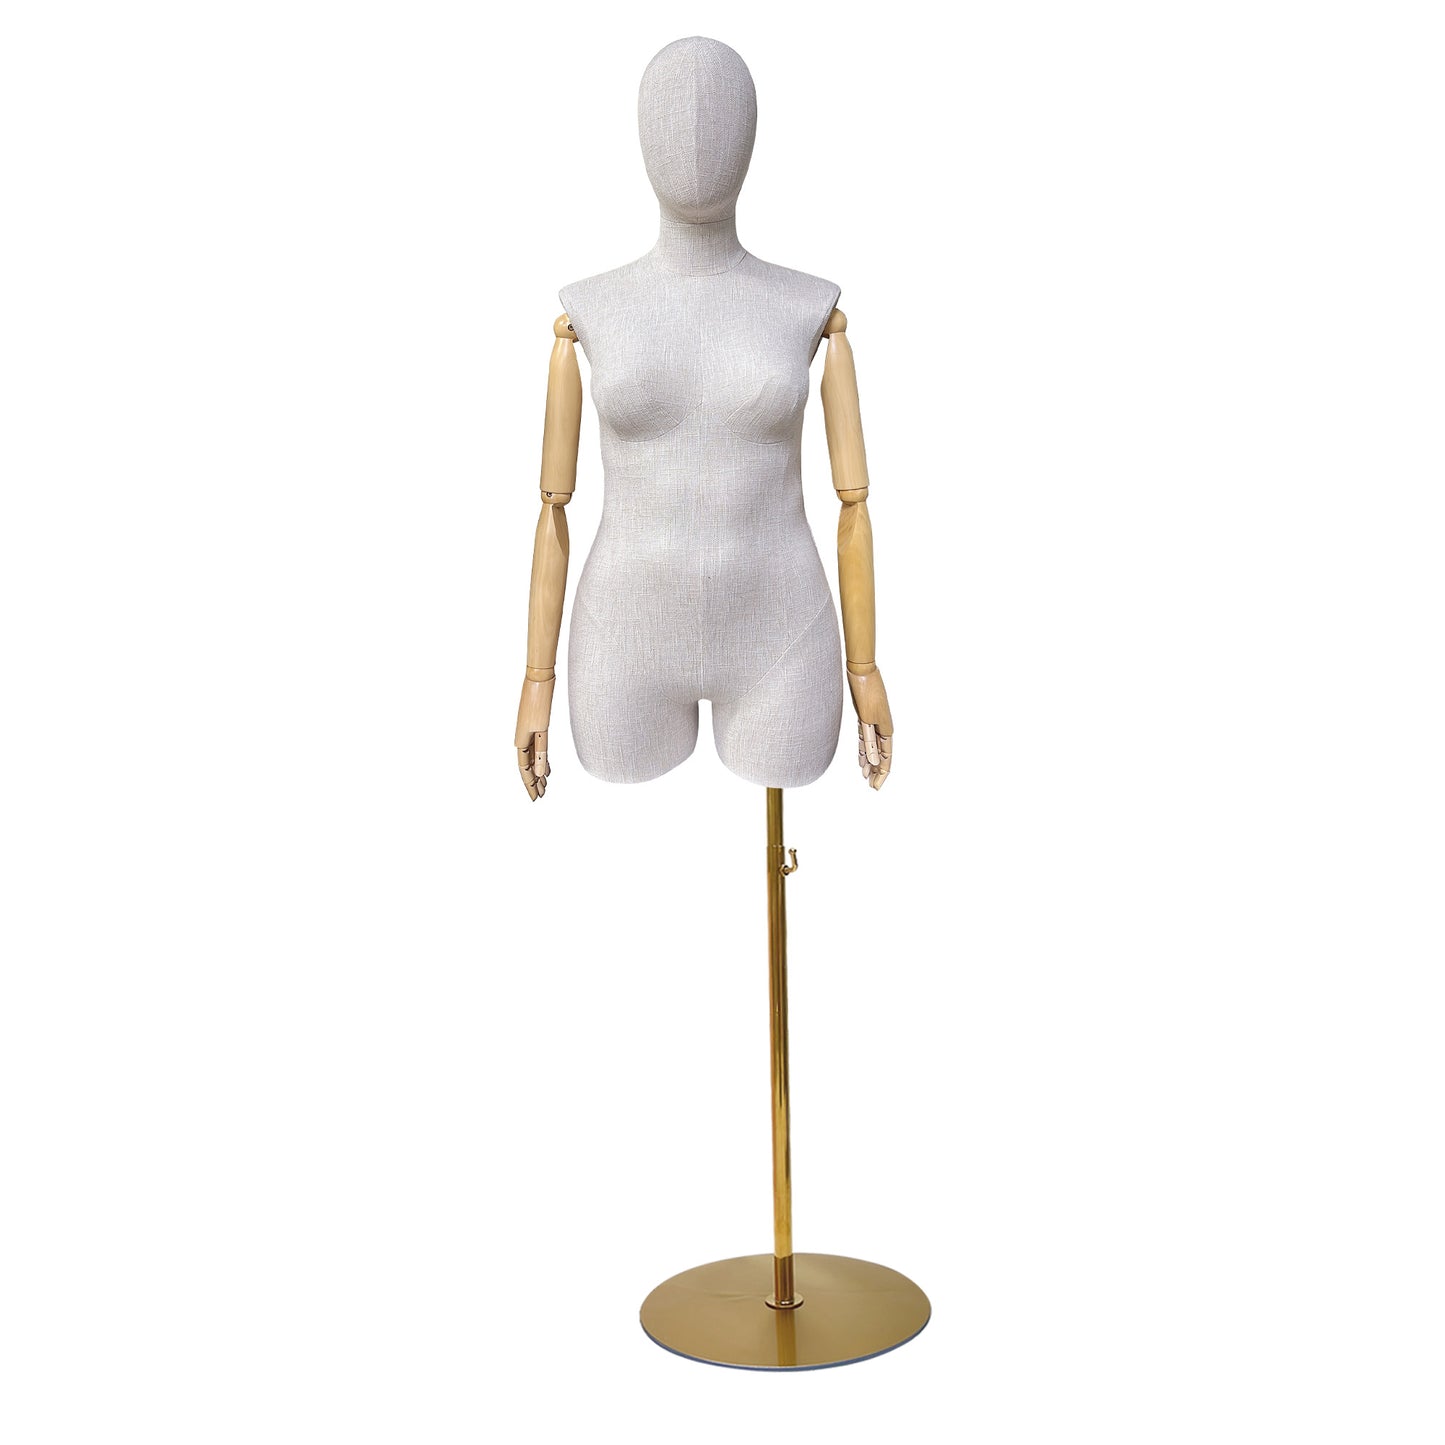 Adult Female Plus Size Torso Mannequin,Half Body Mannequin Torso,Bamboo Linen Fabric Clothing Dress Form,Adult Props with Wooden Arms,Mannequin for Cloth Window Display